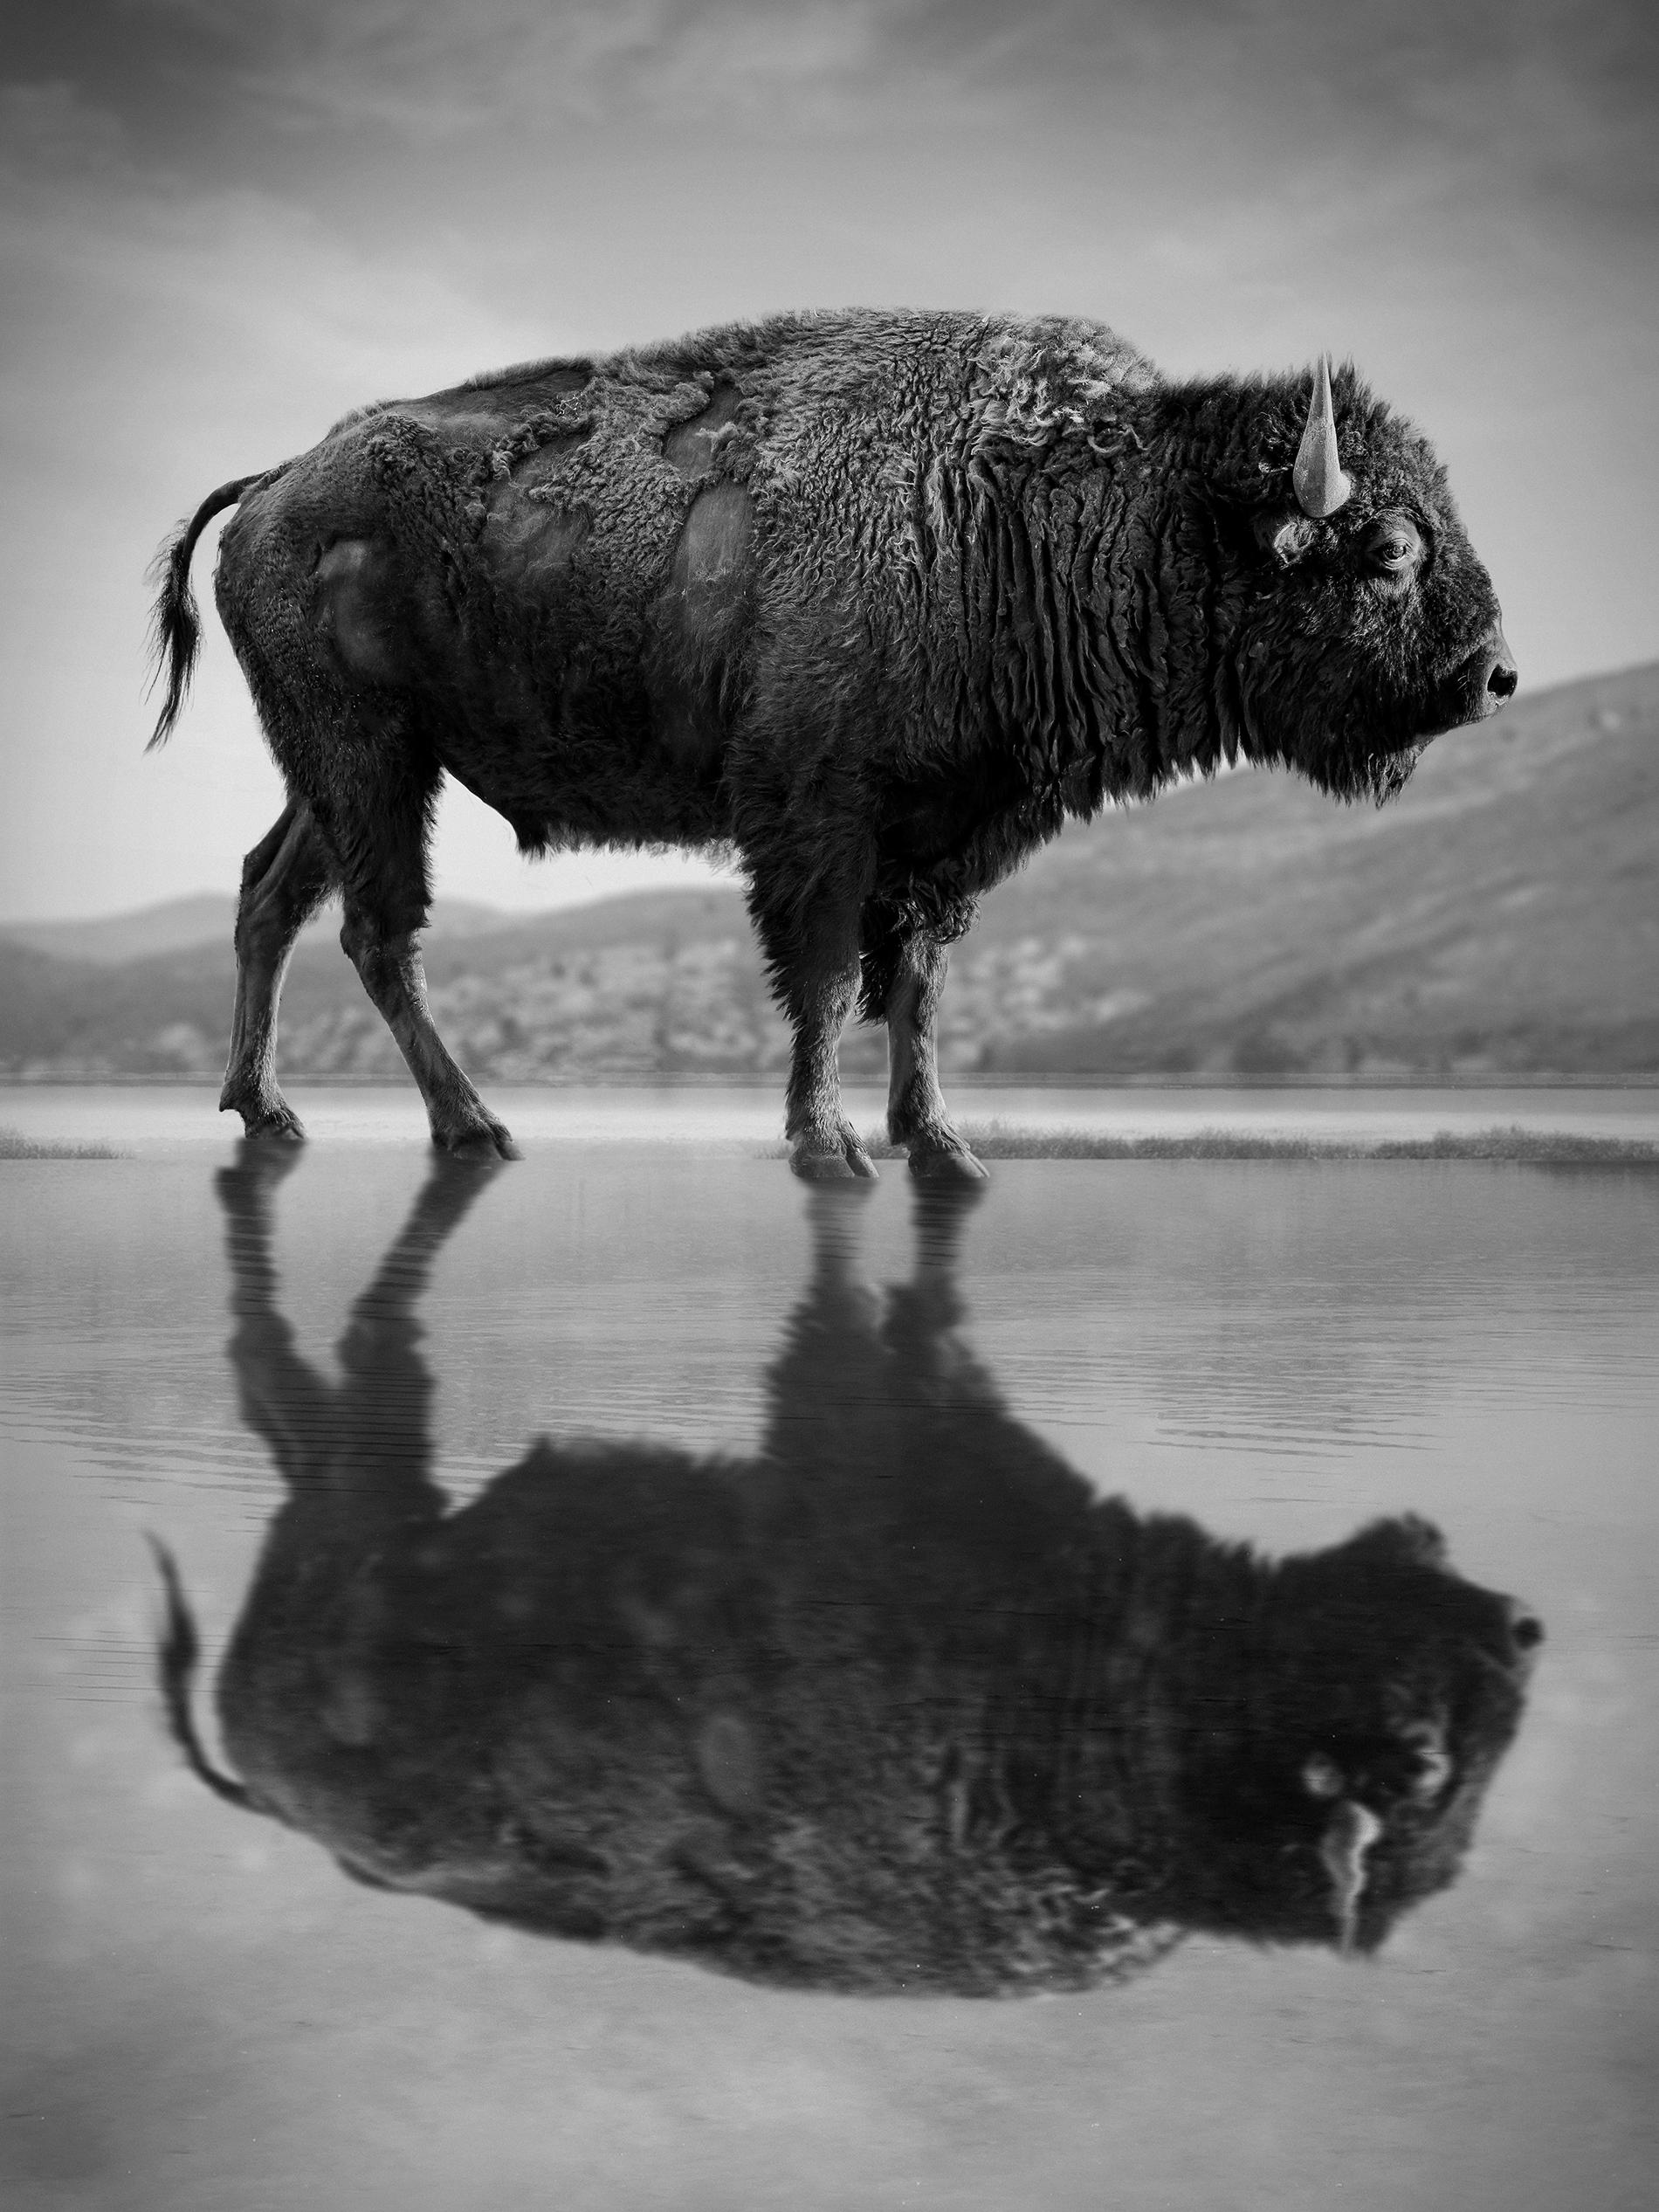 Shane Russeck Black and White Photograph - "Old World" 40x60  Black & White Photography Bison Buffalo Unsigned Photograph